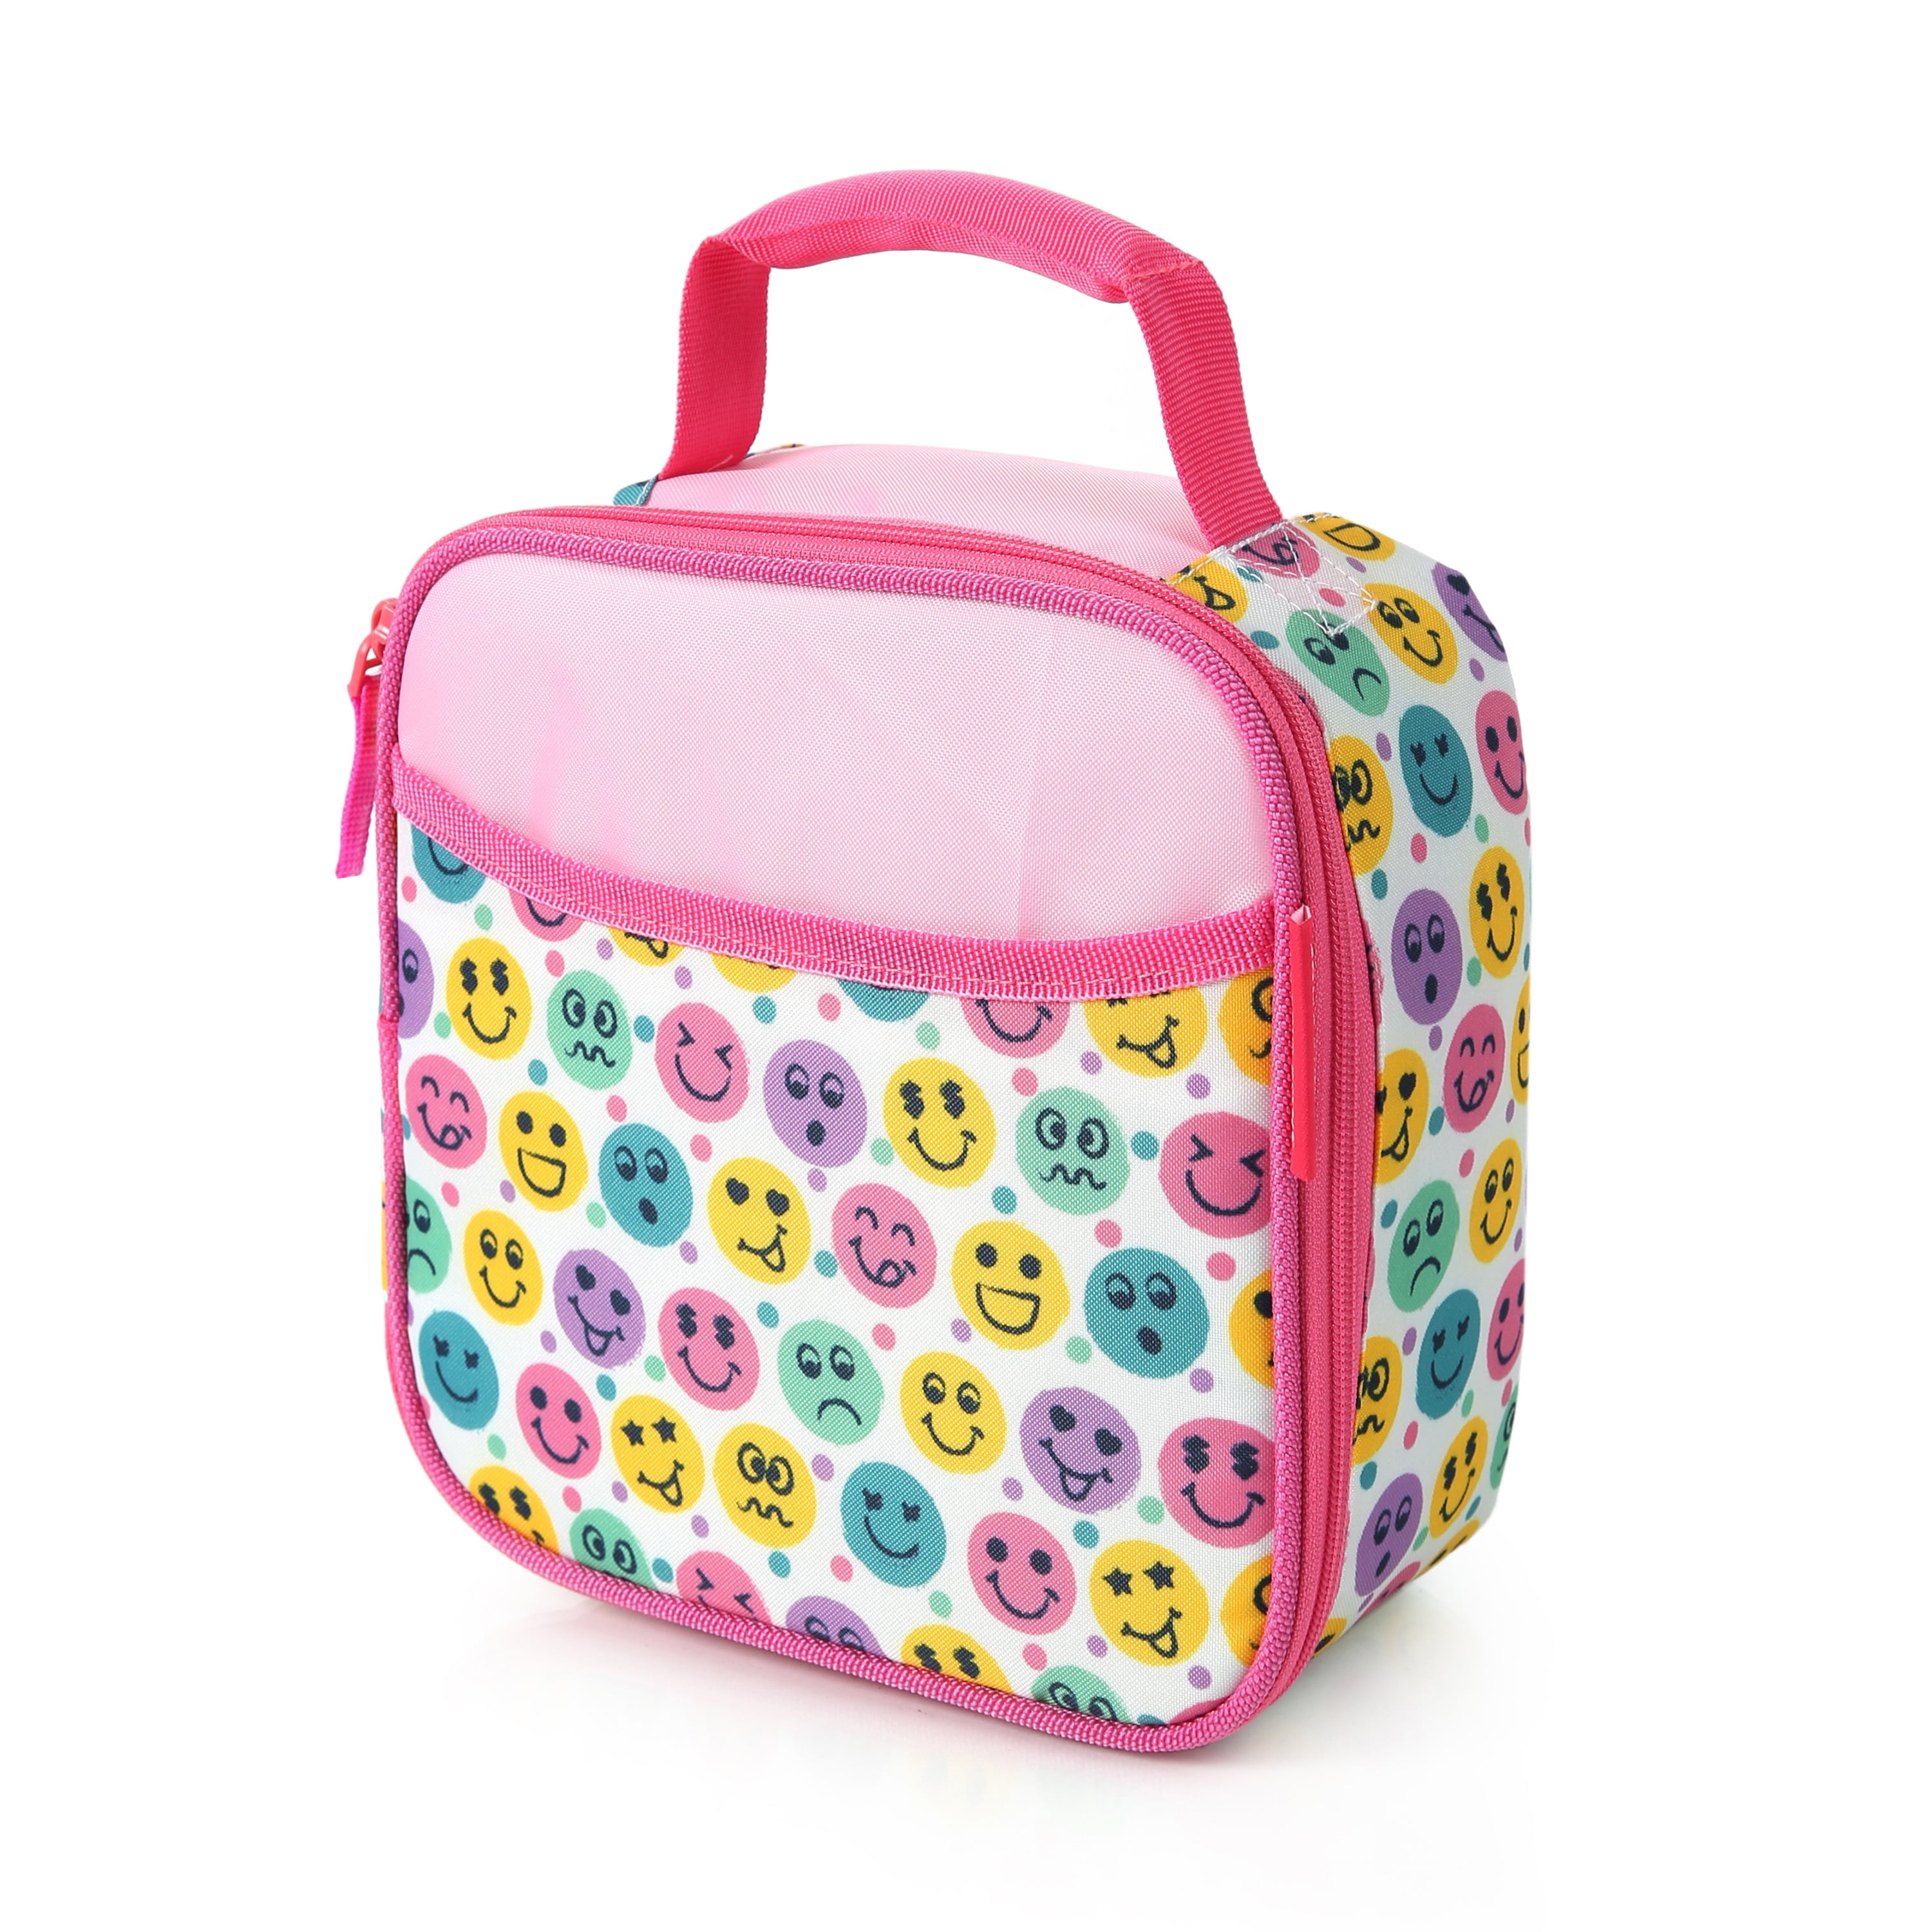  WXOIEOD 22 Pieces Kids Lunch Box Accessories, Cute